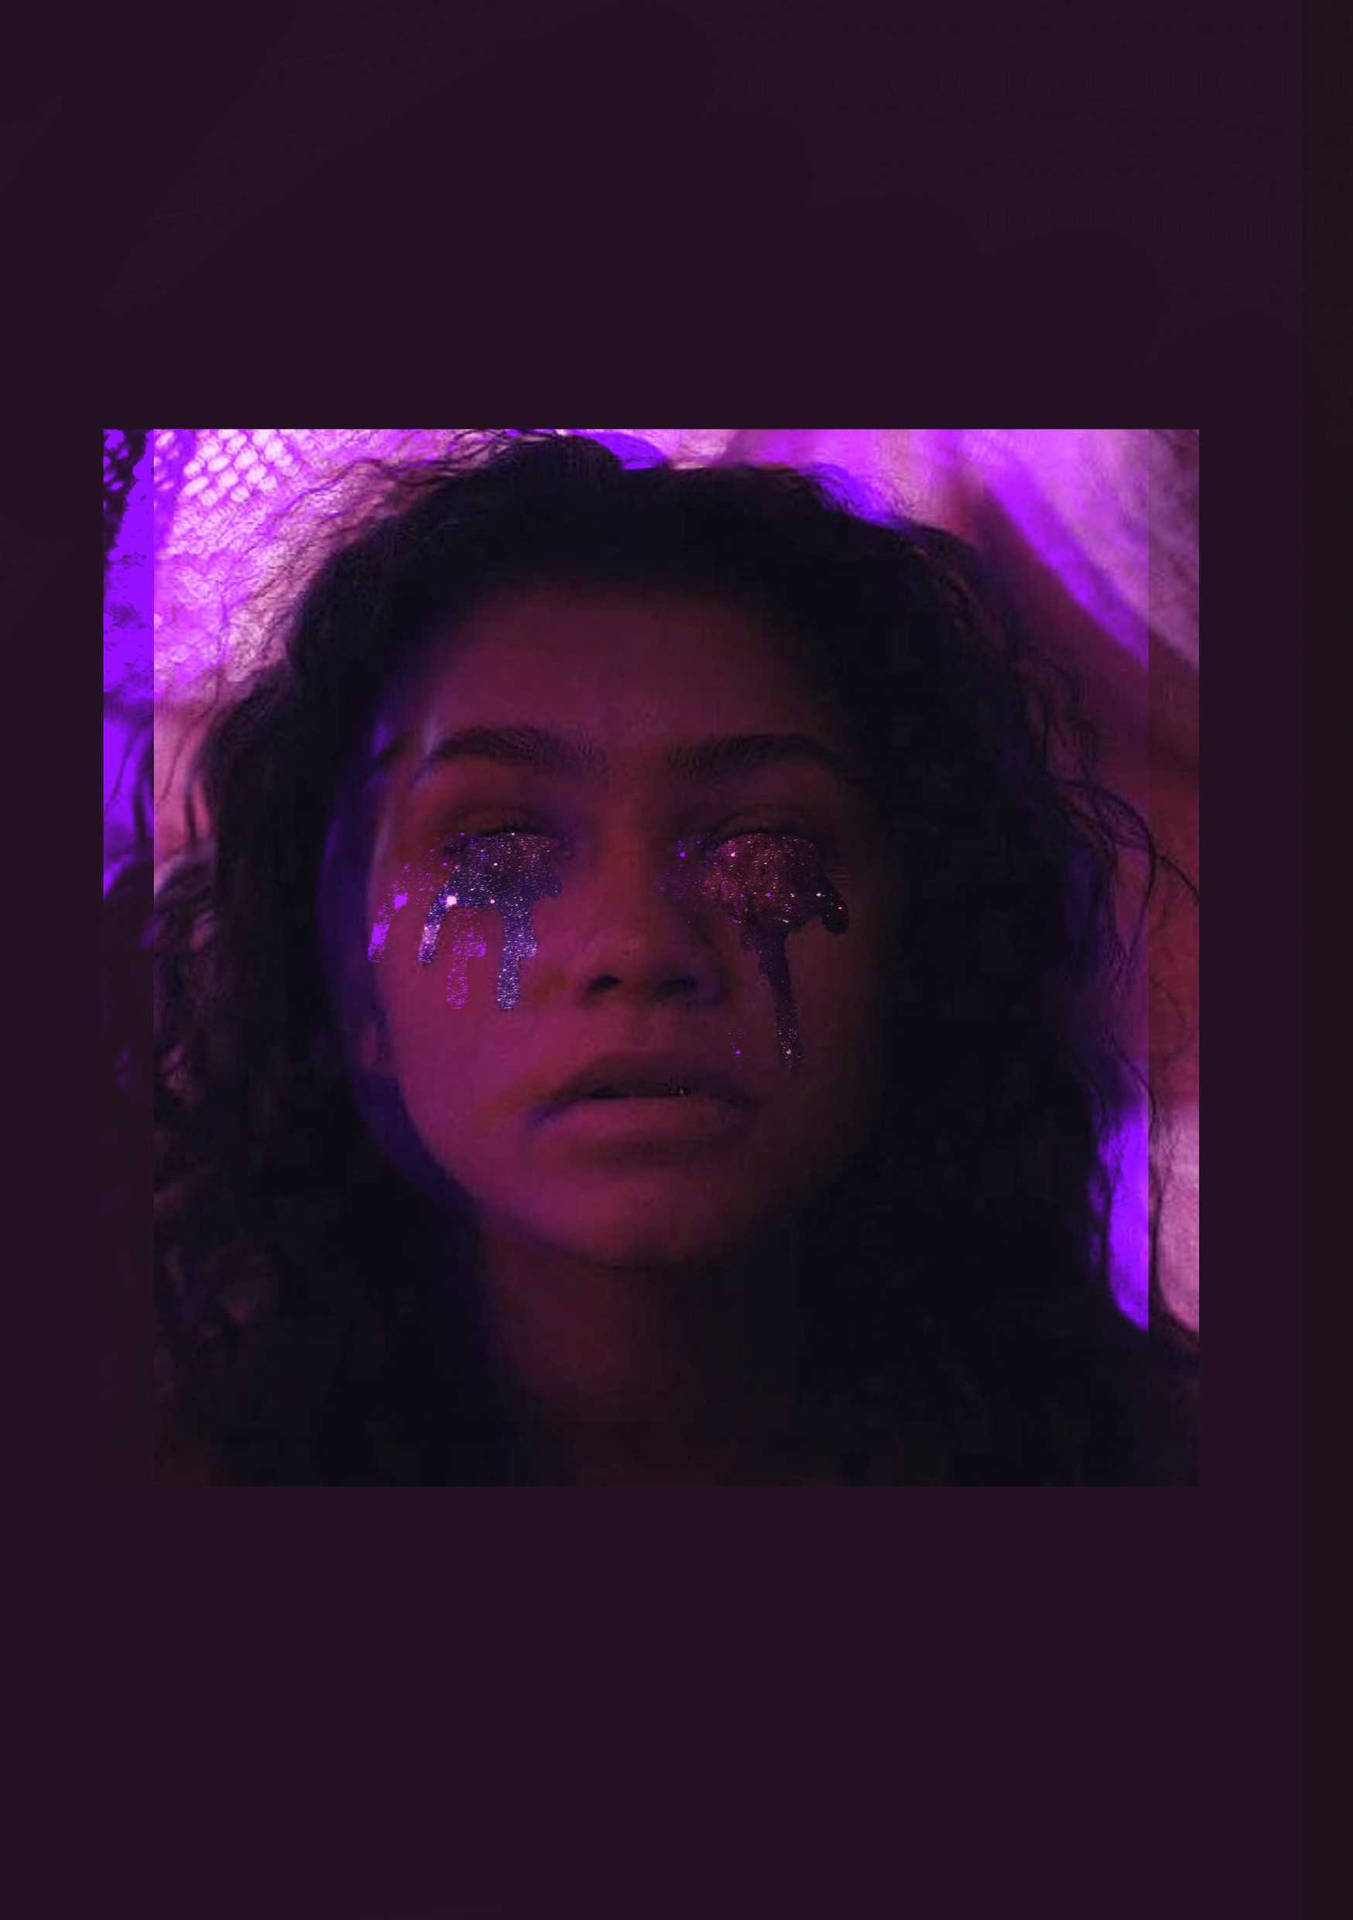 A woman with glitter on her face in a purple light - Euphoria